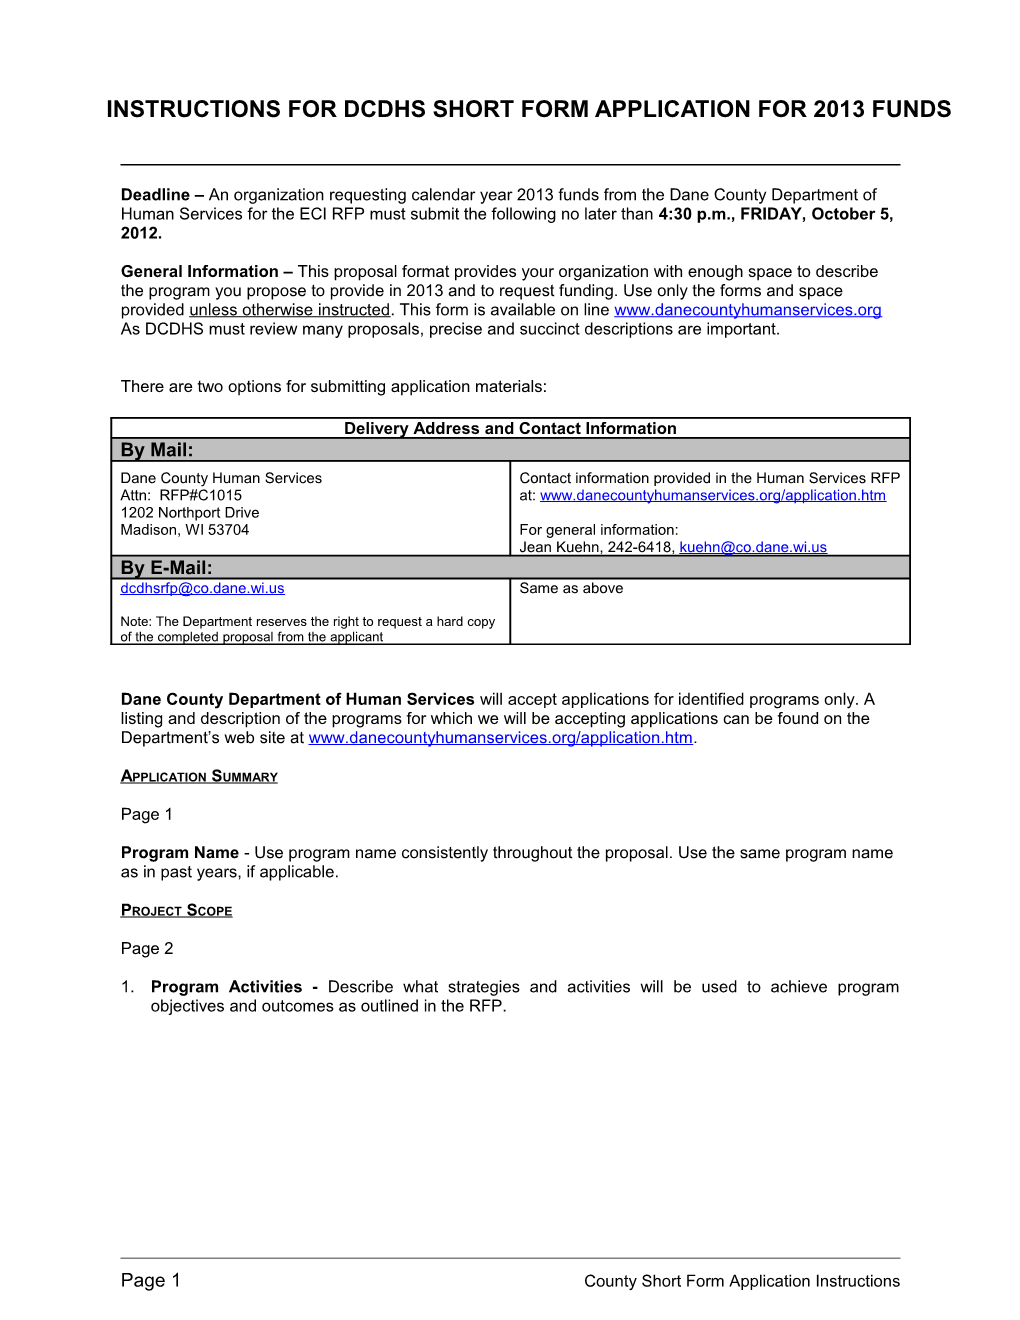 City-County-United Way Consolidated Application